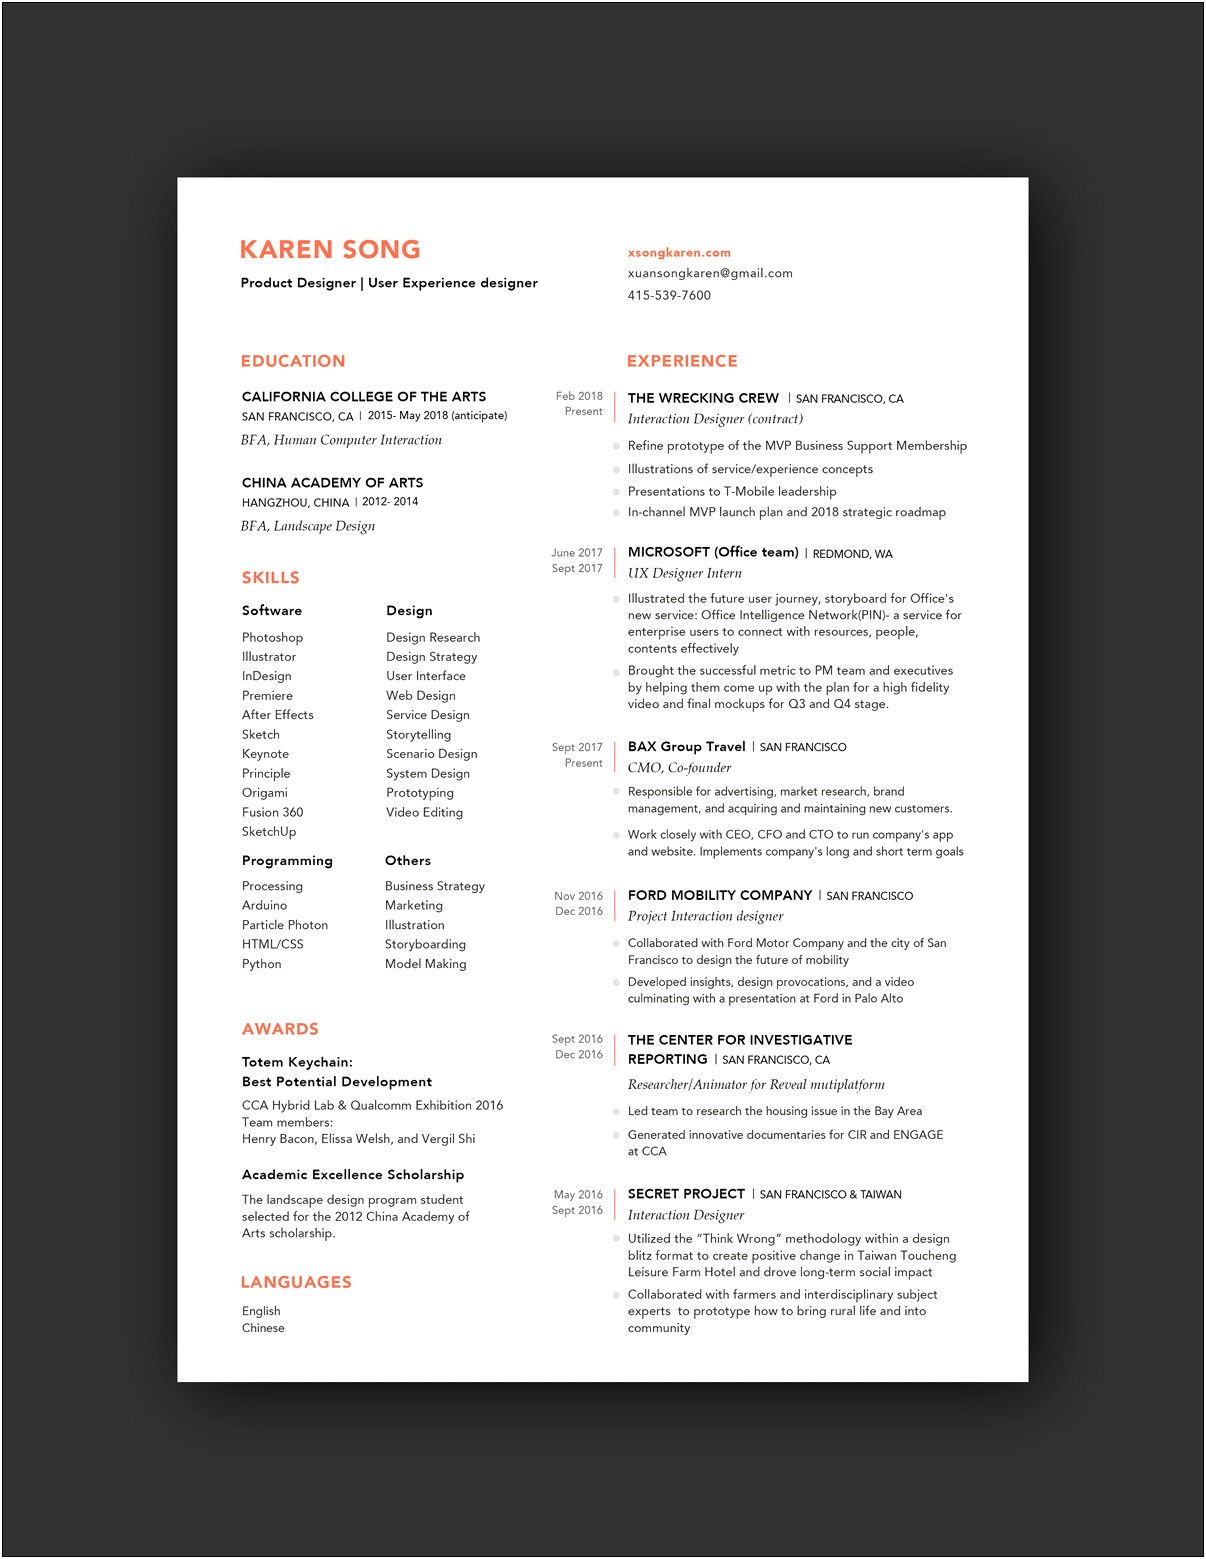 Working On Resume Before College Program Ends